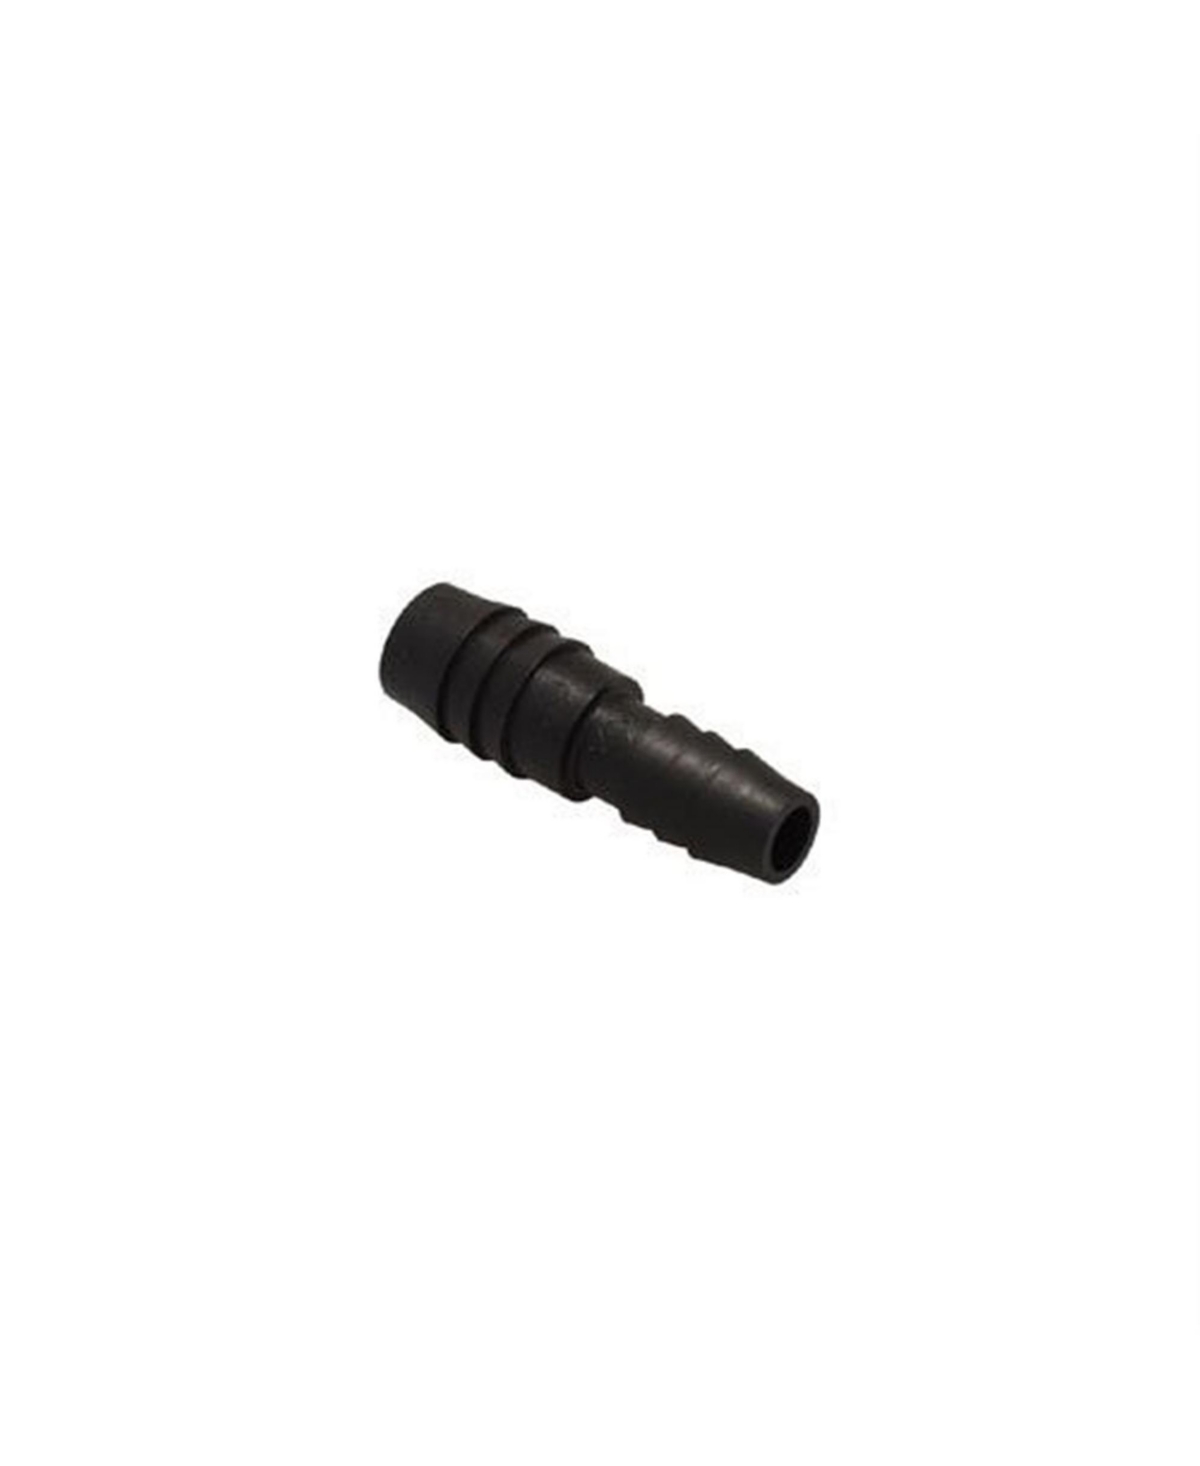 12885 .5 Inch by .62 Inch Hose Barb Coupling - Black